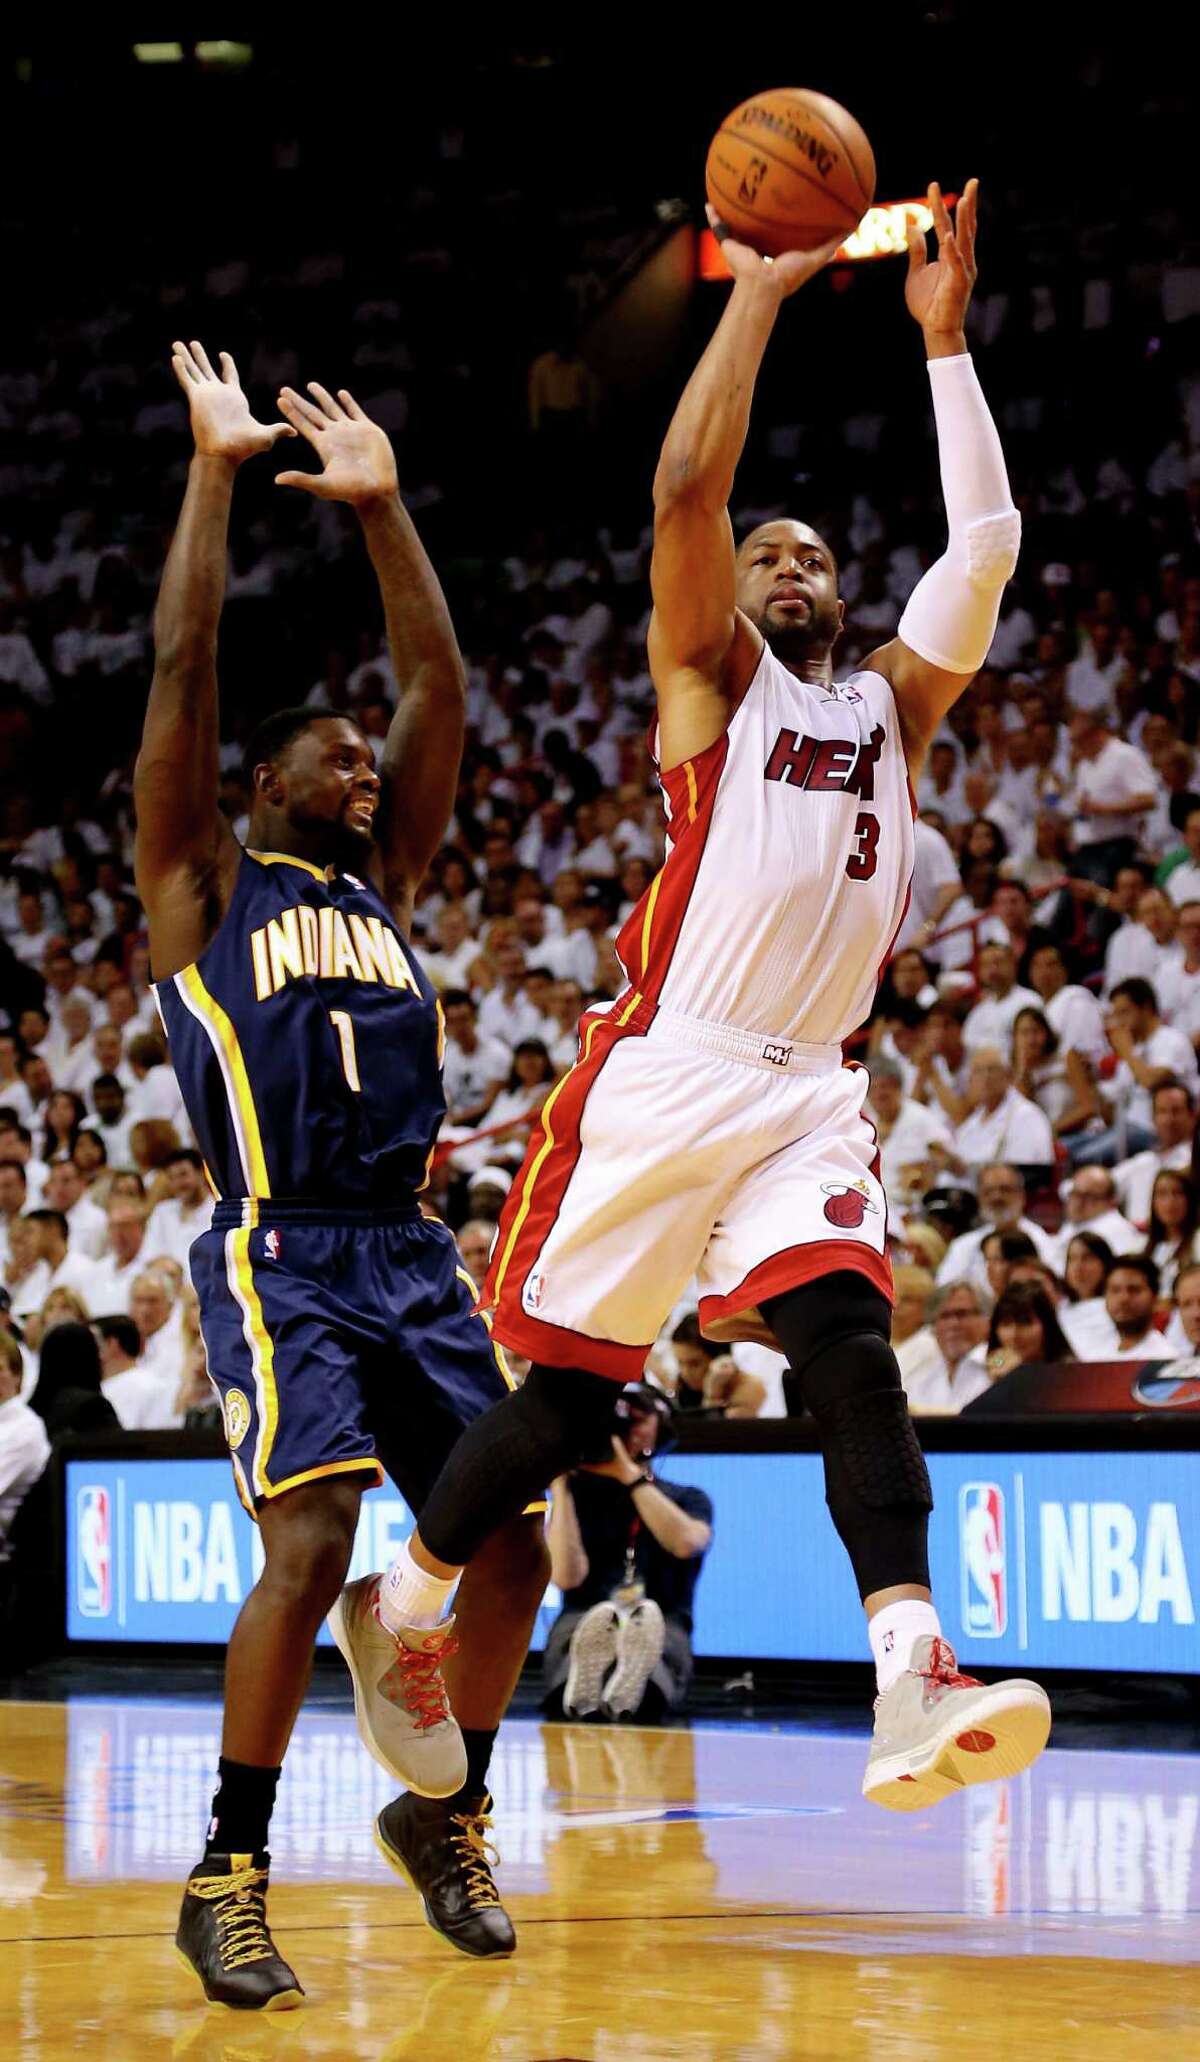 The Heat's Dwyane Wade shoots during Game 4 of the Eastern Conference finals in Miami as the Pacers' Lance Stephenson defends. Wade finished with 15 points, while Stephenson was held to nine.